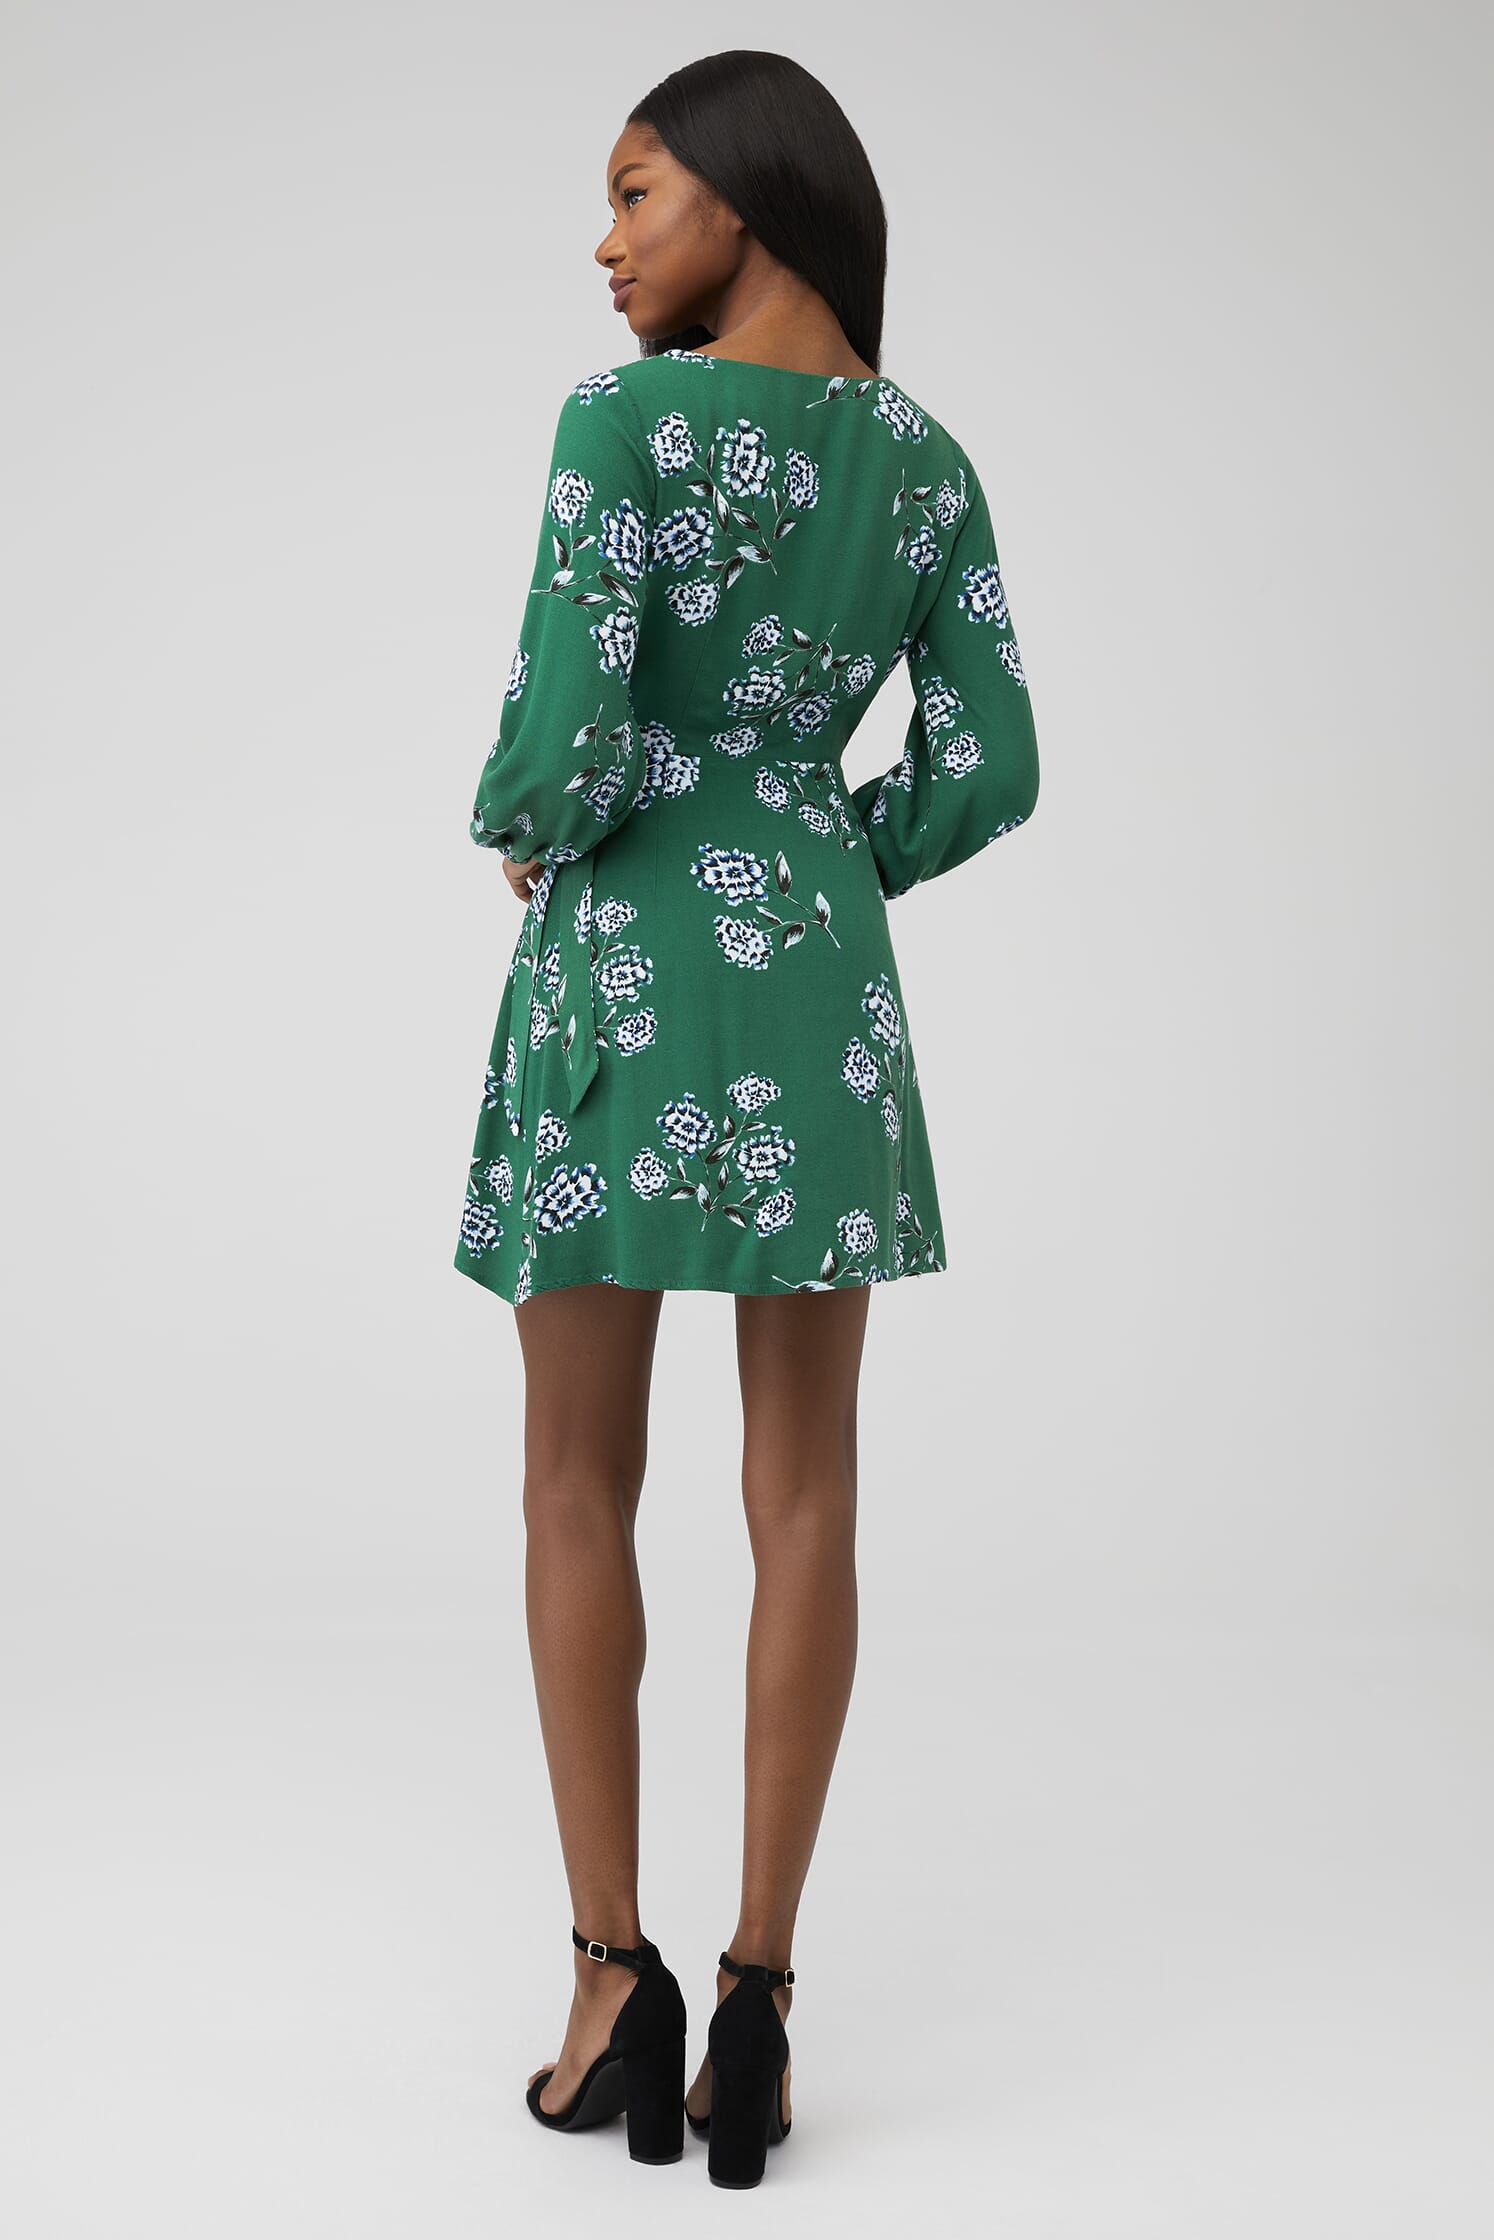 Cupcakes and Cashmere Mystique Dress in Green